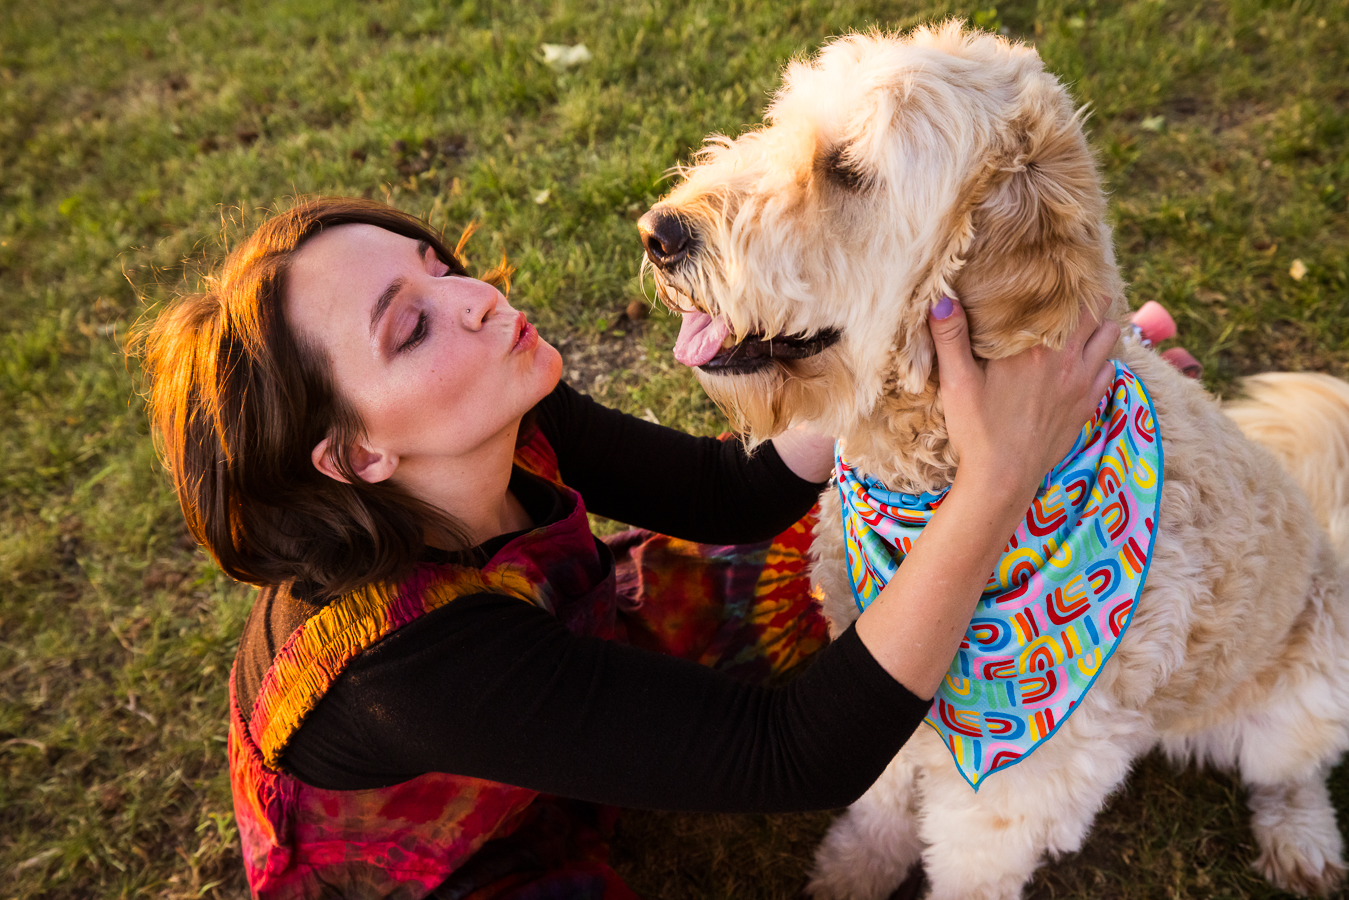 fun, playful image of the artist as she blows kisses towards her dog during this portrait session 